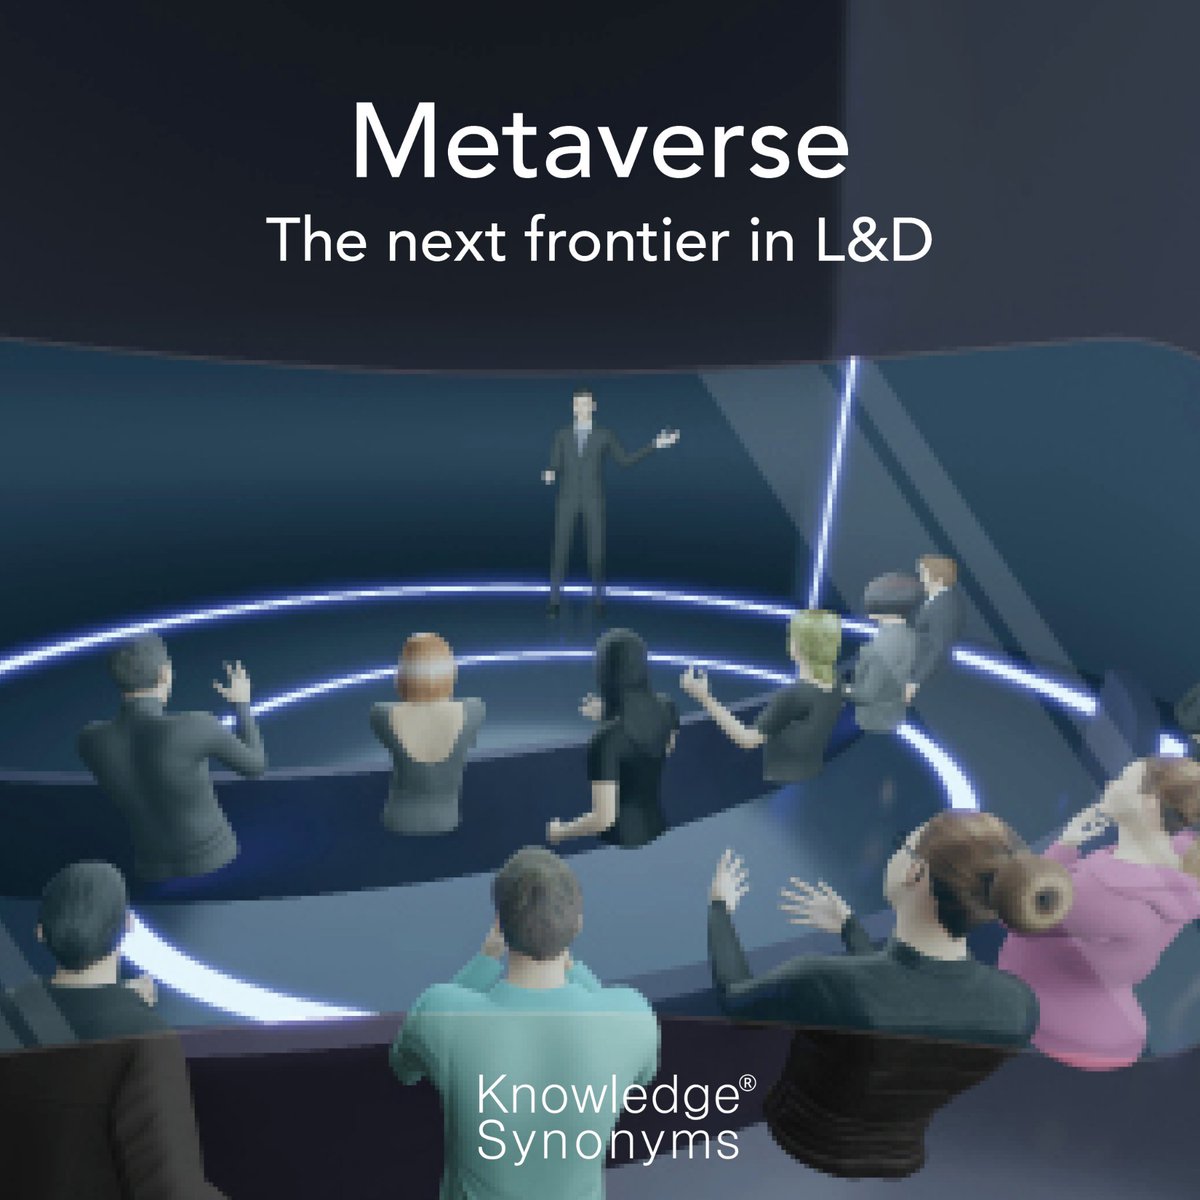 With the emergence of the metaverse, #developing a new #paradigm of #learning isn’t far anymore. 

𝗧𝗼 𝗹𝗲𝗮𝗿𝗻 𝗺𝗼𝗿𝗲, 𝗰𝗹𝗶𝗰𝗸: knowledgesynonyms.com/mindshare/meta…

#KnowledgeSynonyms #metaverse #metaversenews #eLearning #metaversenews